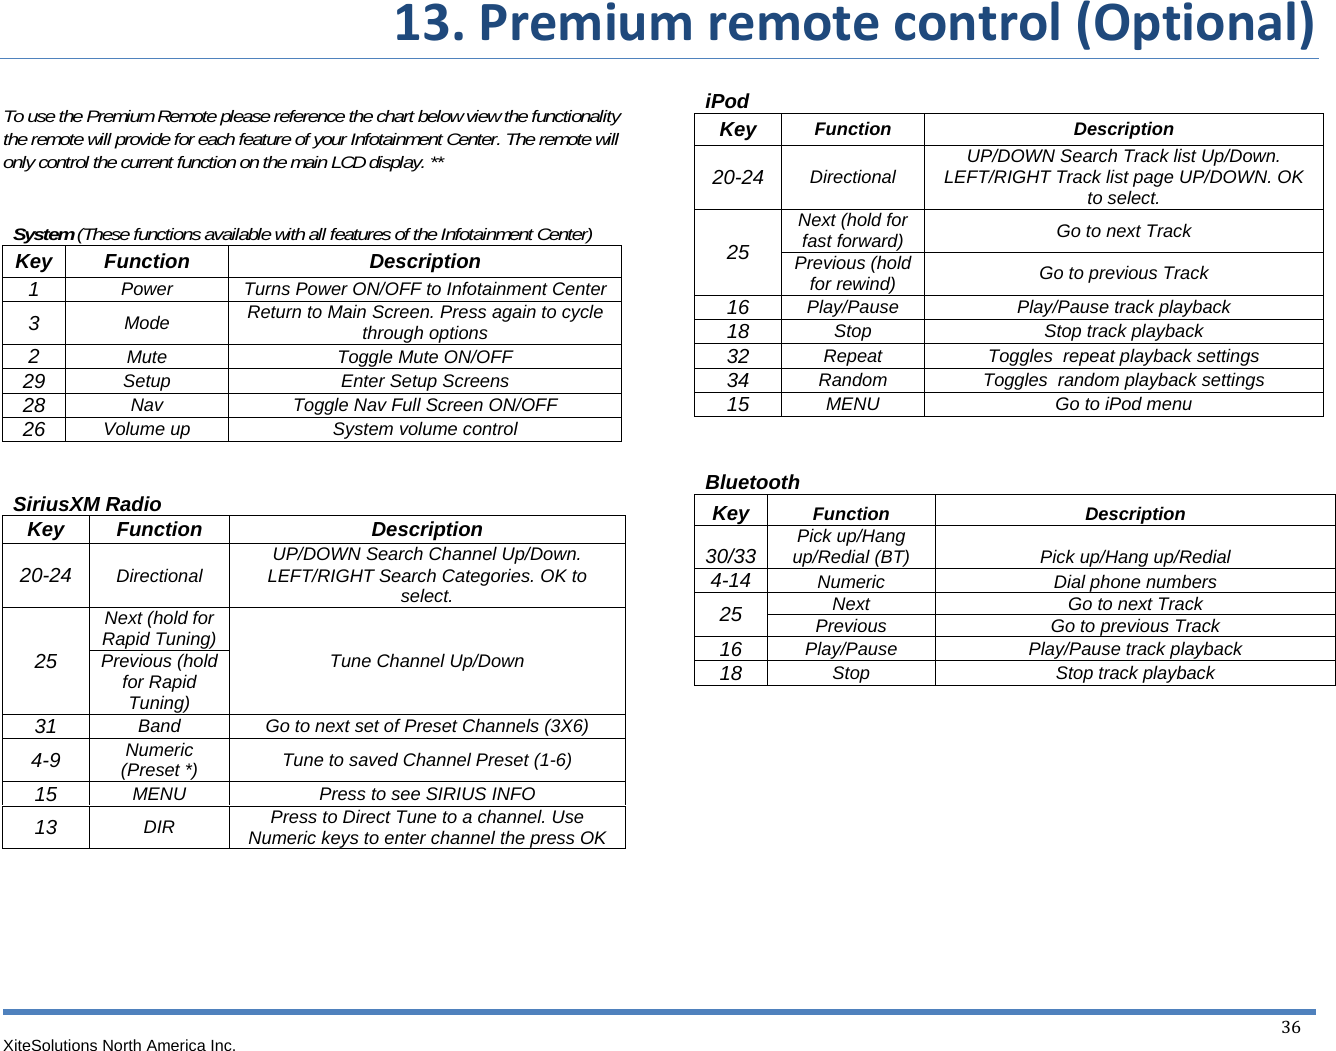  13.Premiumremotecontrol(Optional)XiteSolutions North America Inc.  36  To use the Premium Remote please reference the chart below view the functionality the remote will provide for each feature of your Infotainment Center. The remote will only control the current function on the main LCD display. **   System (These functions available with all features of the Infotainment Center) Key Function Description 1  Power  Turns Power ON/OFF to Infotainment Center3  Mode  Return to Main Screen. Press again to cycle through options 2  Mute Toggle Mute ON/OFF 29  Setup  Enter Setup Screens 28  Nav  Toggle Nav Full Screen ON/OFF 26  Volume up  System volume control   SiriusXM Radio Key Function  Description 20-24 Directional  UP/DOWN Search Channel Up/Down. LEFT/RIGHT Search Categories. OK to select. 25 Next (hold for Rapid Tuning)  Tune Channel Up/Down Previous (hold for Rapid Tuning) 31  Band  Go to next set of Preset Channels (3X6) 4-9  Numeric  (Preset *)  Tune to saved Channel Preset (1-6) 15  MENU  Press to see SIRIUS INFO 13  DIR  Press to Direct Tune to a channel. Use Numeric keys to enter channel the press OK        iPod Key  Function Description 20-24  Directional  UP/DOWN Search Track list Up/Down. LEFT/RIGHT Track list page UP/DOWN. OK to select. 25 Next (hold for fast forward)  Go to next Track Previous (hold for rewind)  Go to previous Track 16  Play/Pause  Play/Pause track playback 18  Stop  Stop track playback 32  Repeat  Toggles  repeat playback settings 34  Random  Toggles  random playback settings 15  MENU  Go to iPod menu   Bluetooth Key  Function Description 30/33  Pick up/Hang up/Redial (BT)  Pick up/Hang up/Redial 4-14  Numeric  Dial phone numbers 25  Next  Go to next Track Previous Go to previous Track 16  Play/Pause  Play/Pause track playback 18  Stop  Stop track playback   